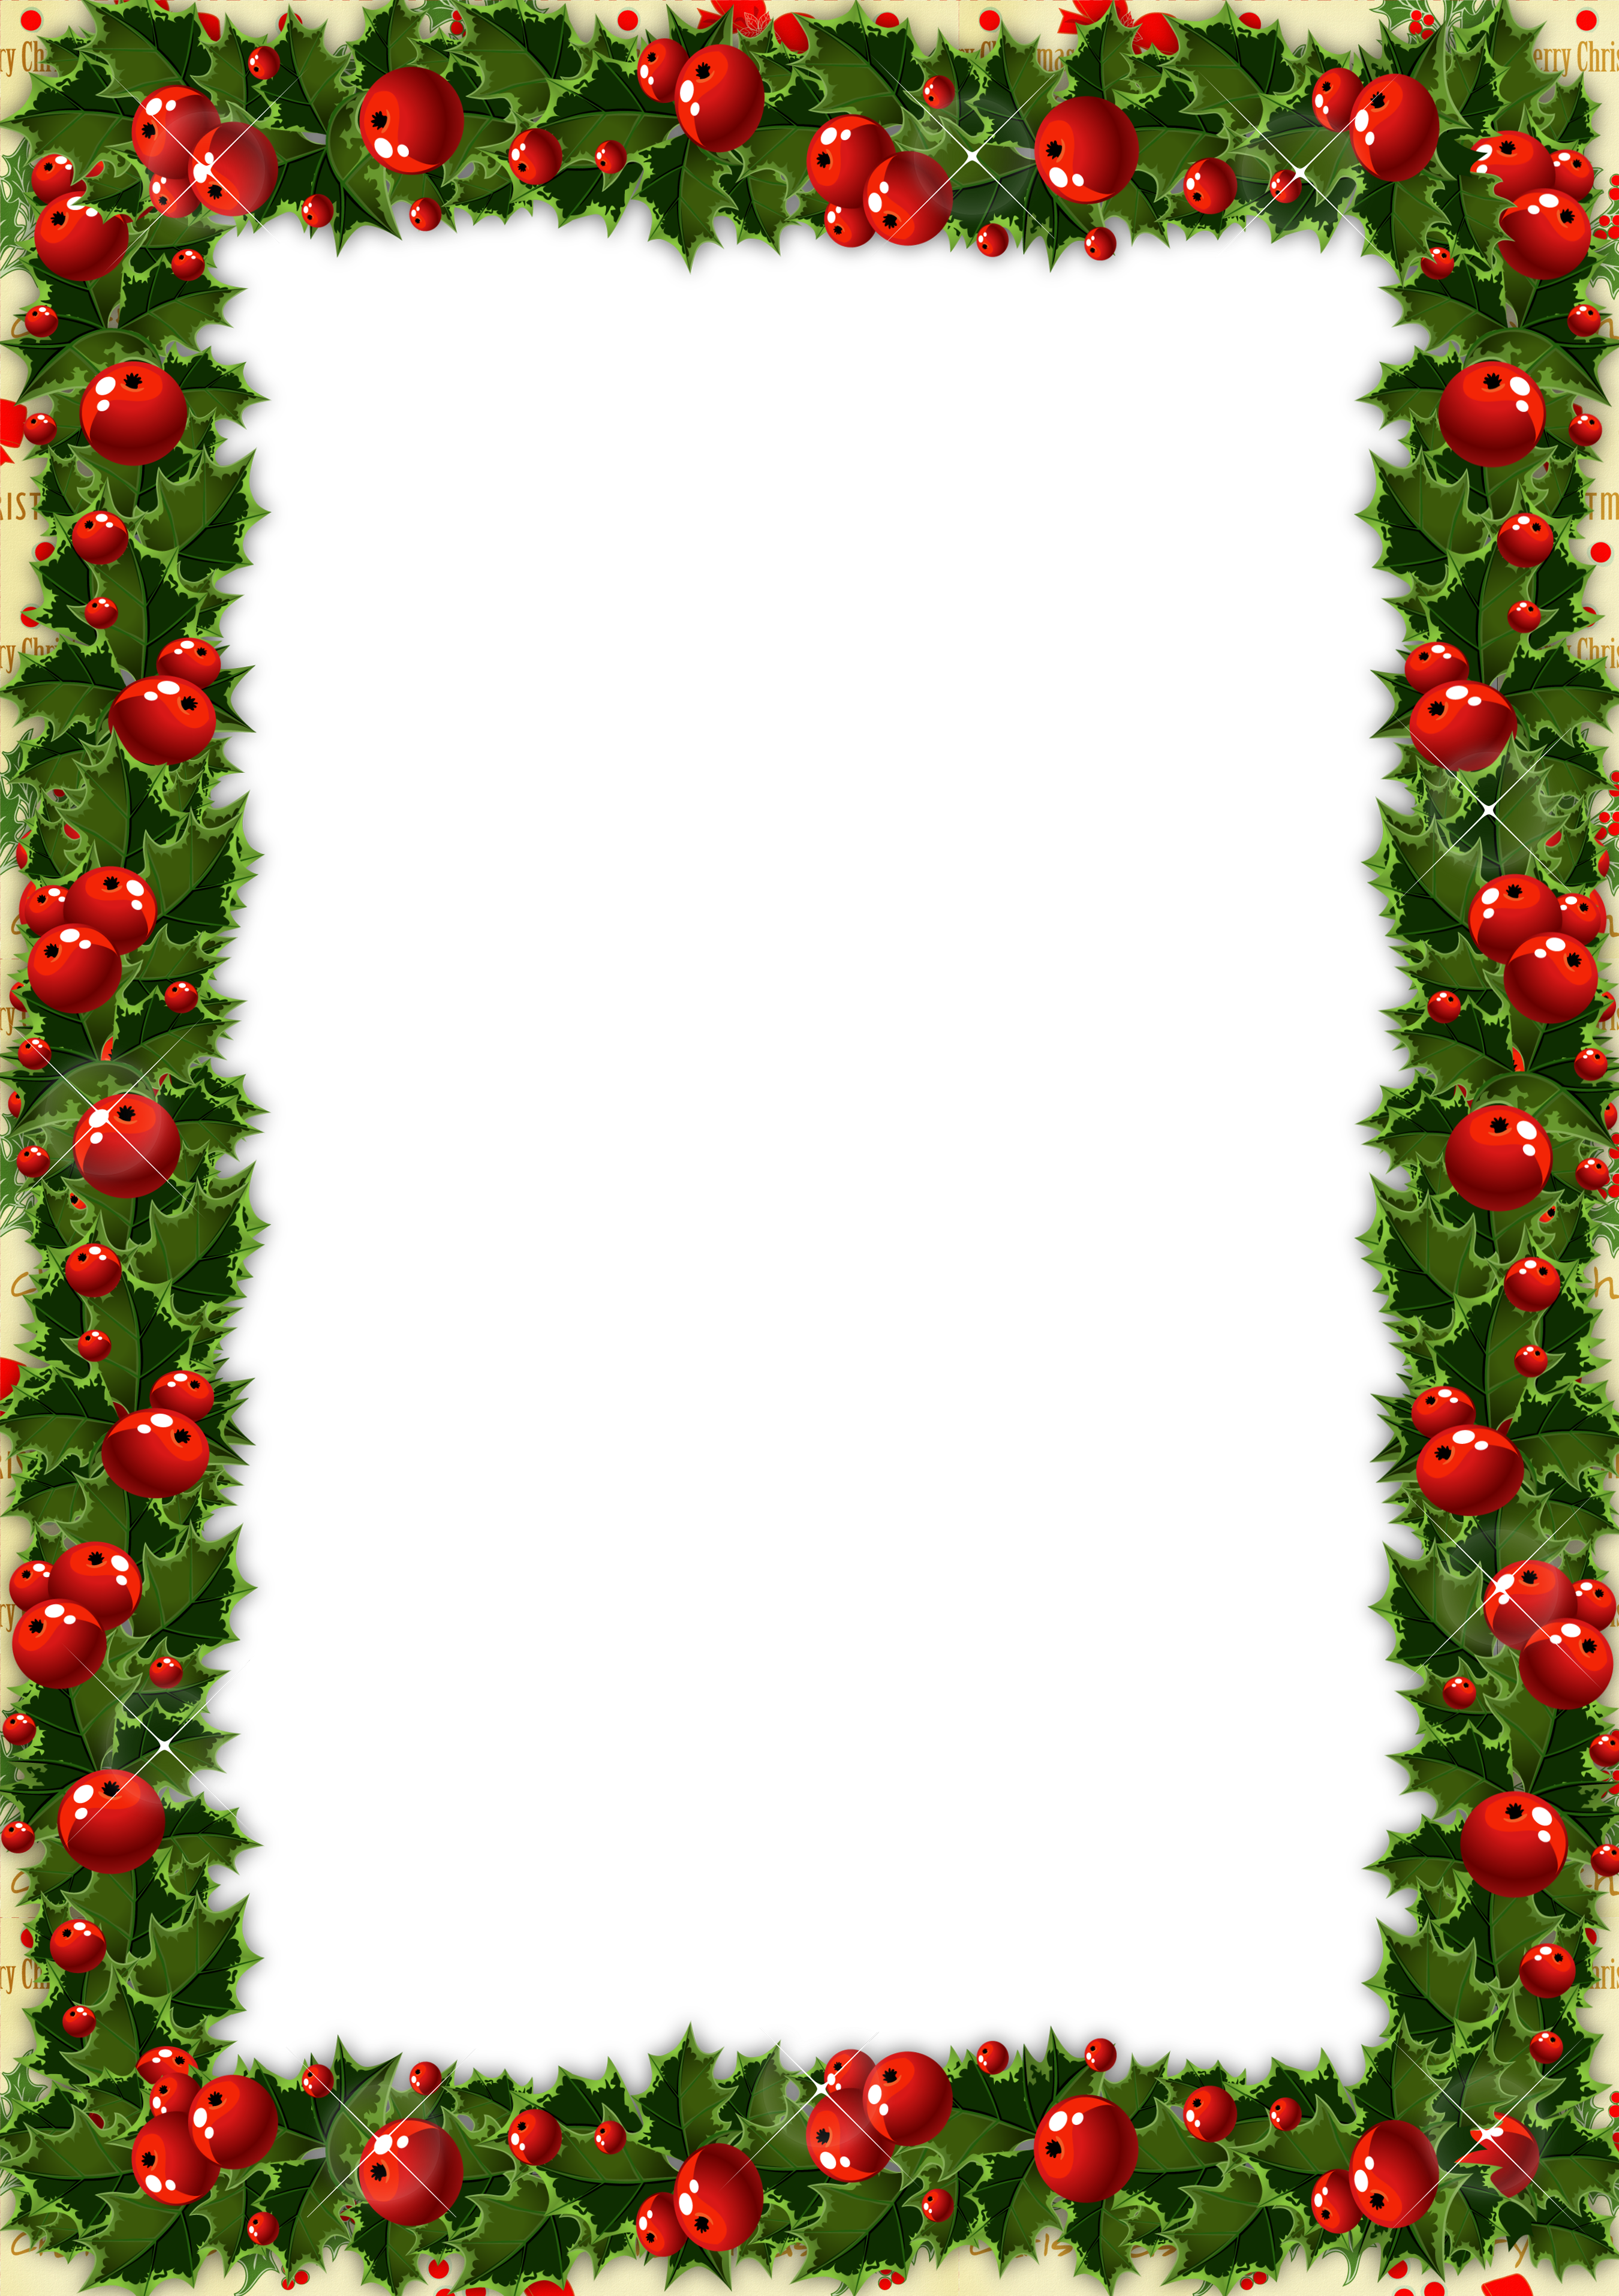 Transparent photo frame with. Invitation clipart christmas